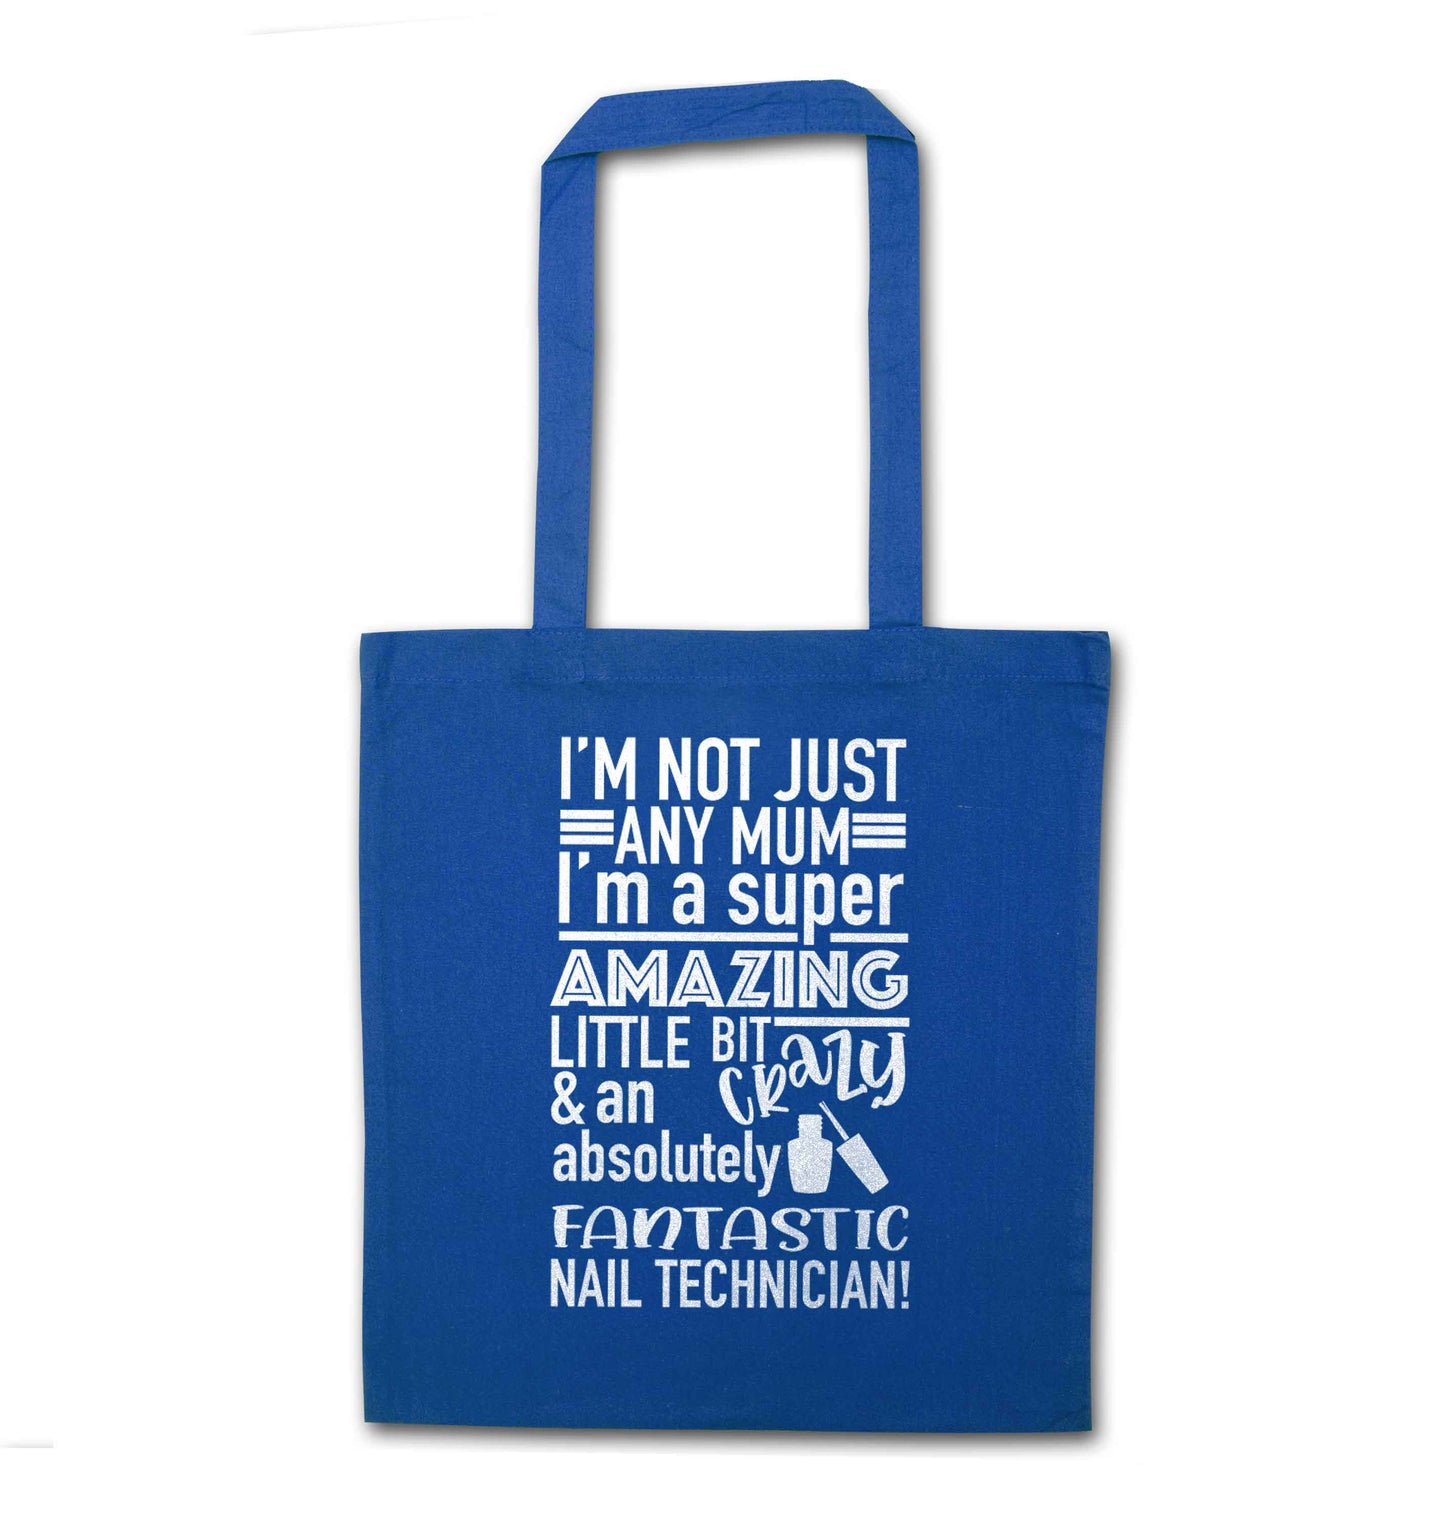 I'm not just any mum I'm a super amazing little bit crazy and an absolutely fantastic nail technician! blue tote bag